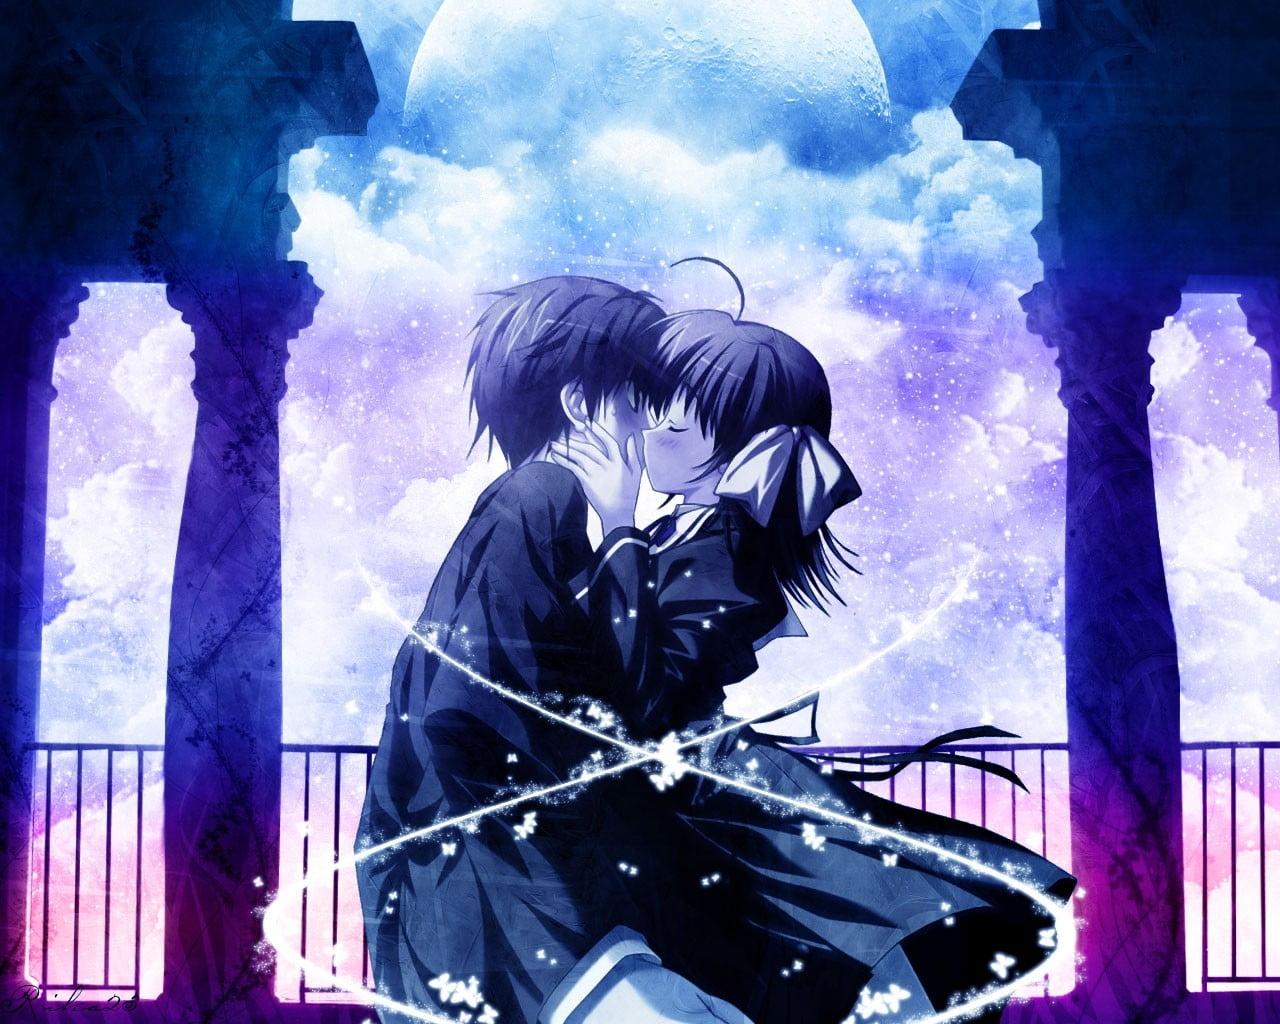 Anime Boy And Girl Kissing Wallpapers Wallpaper Cave